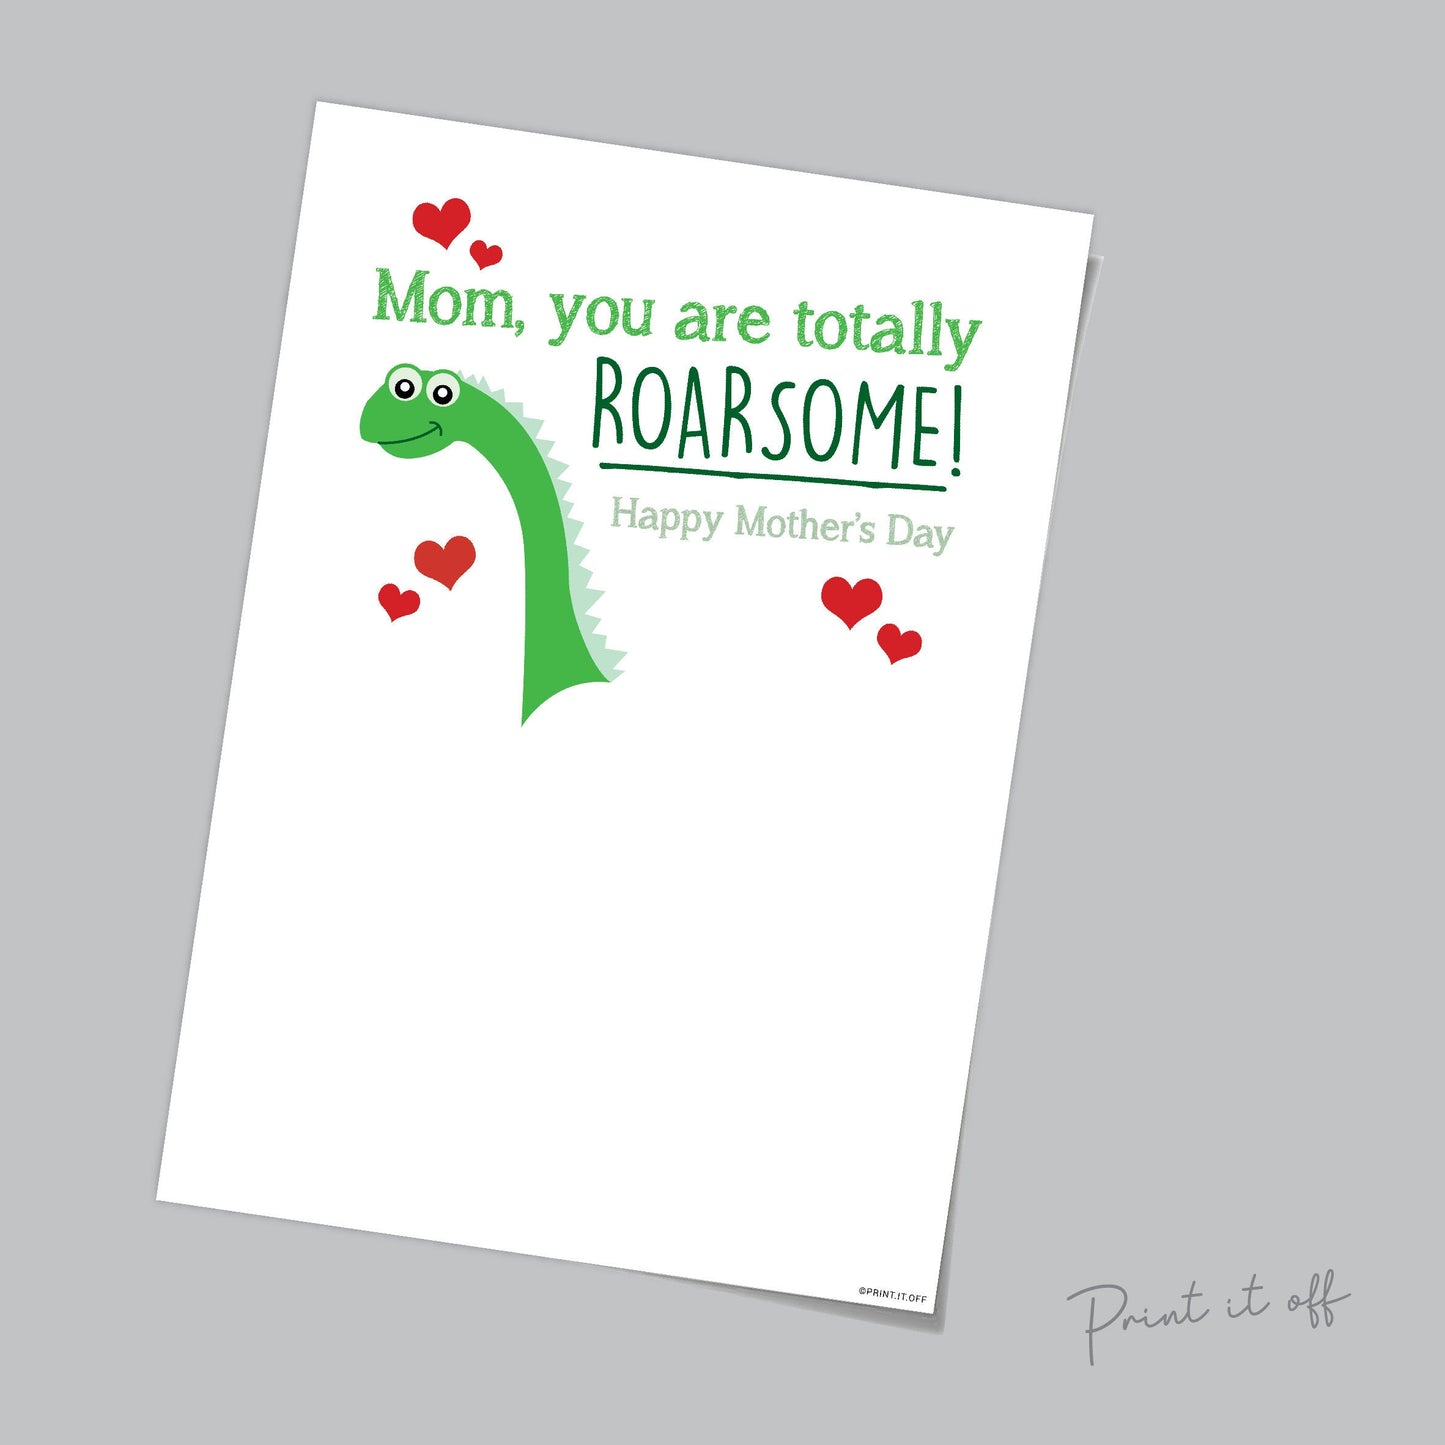 Mom You Are Totally Roarsome / Handprint Art Kids Baby Craft Gift DIY Card / Dinosaur Keepsake / Happy Mothers Day / Print it off